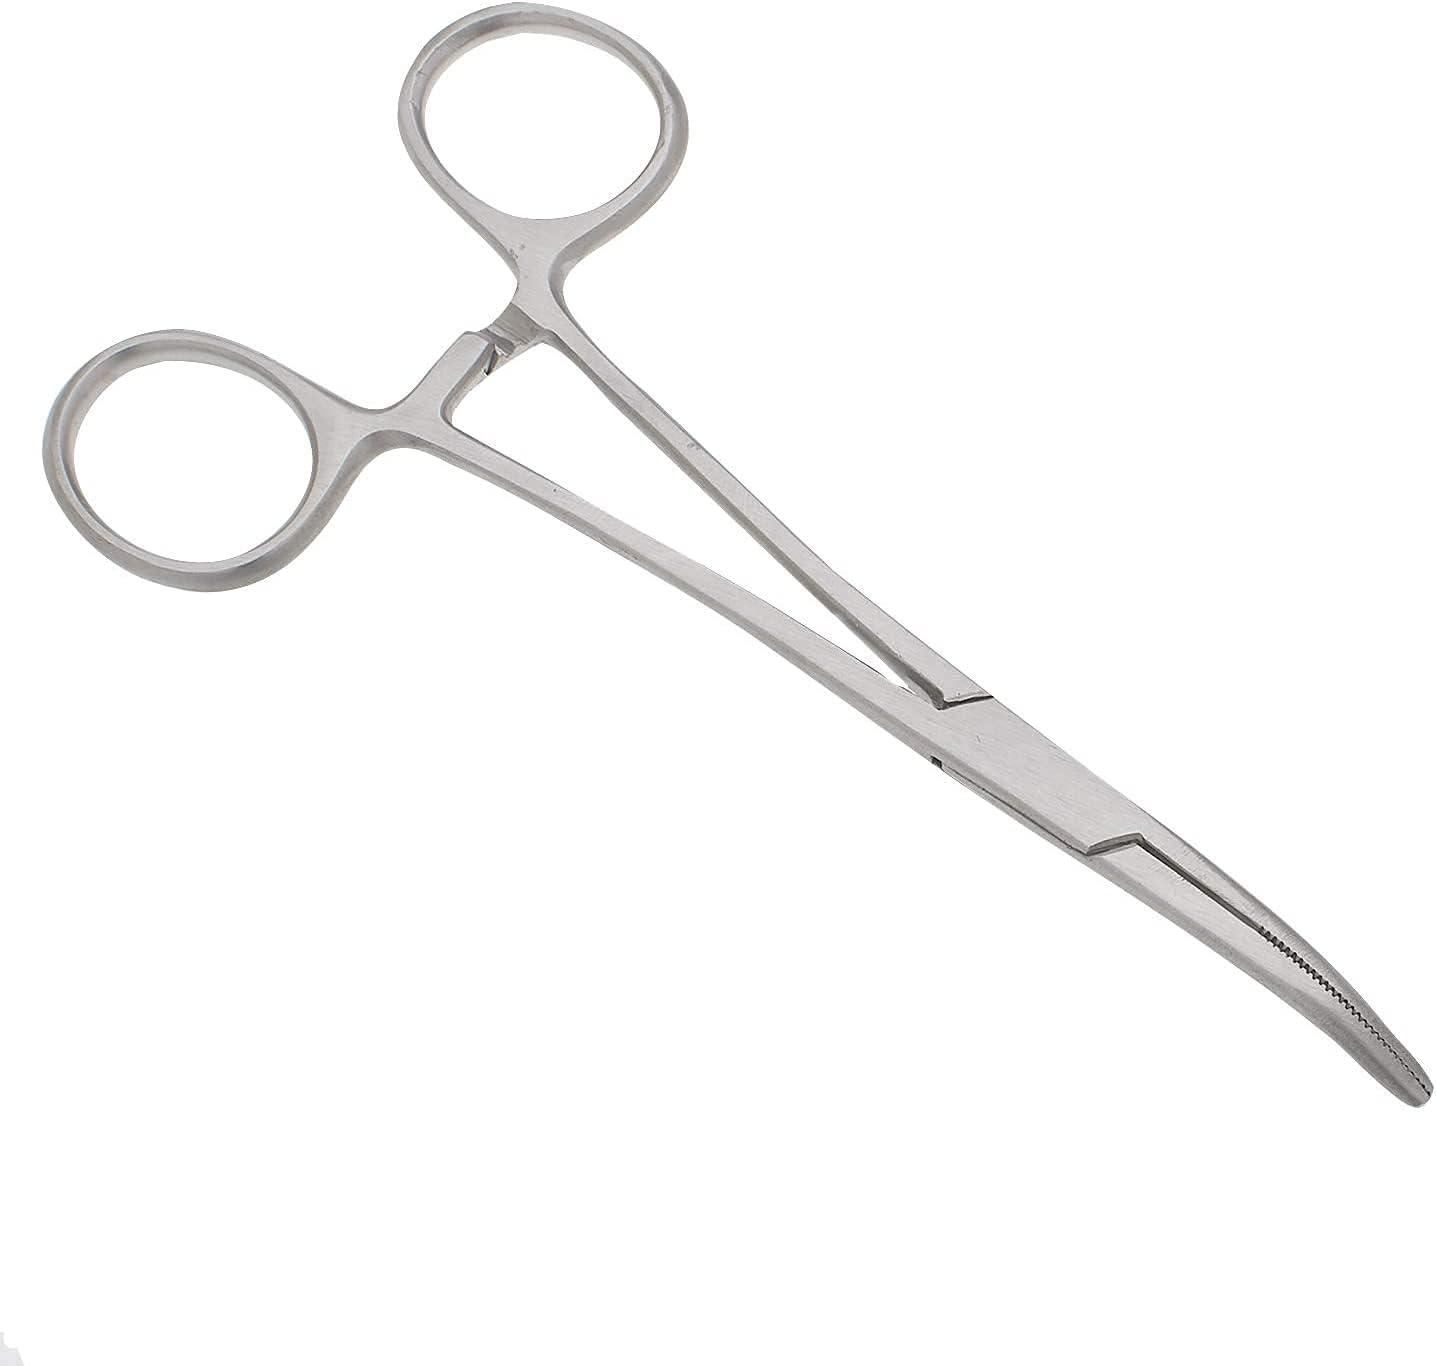 2 Pc Fly Fishing Pliers Hook Removing & Gripping Locking Forceps